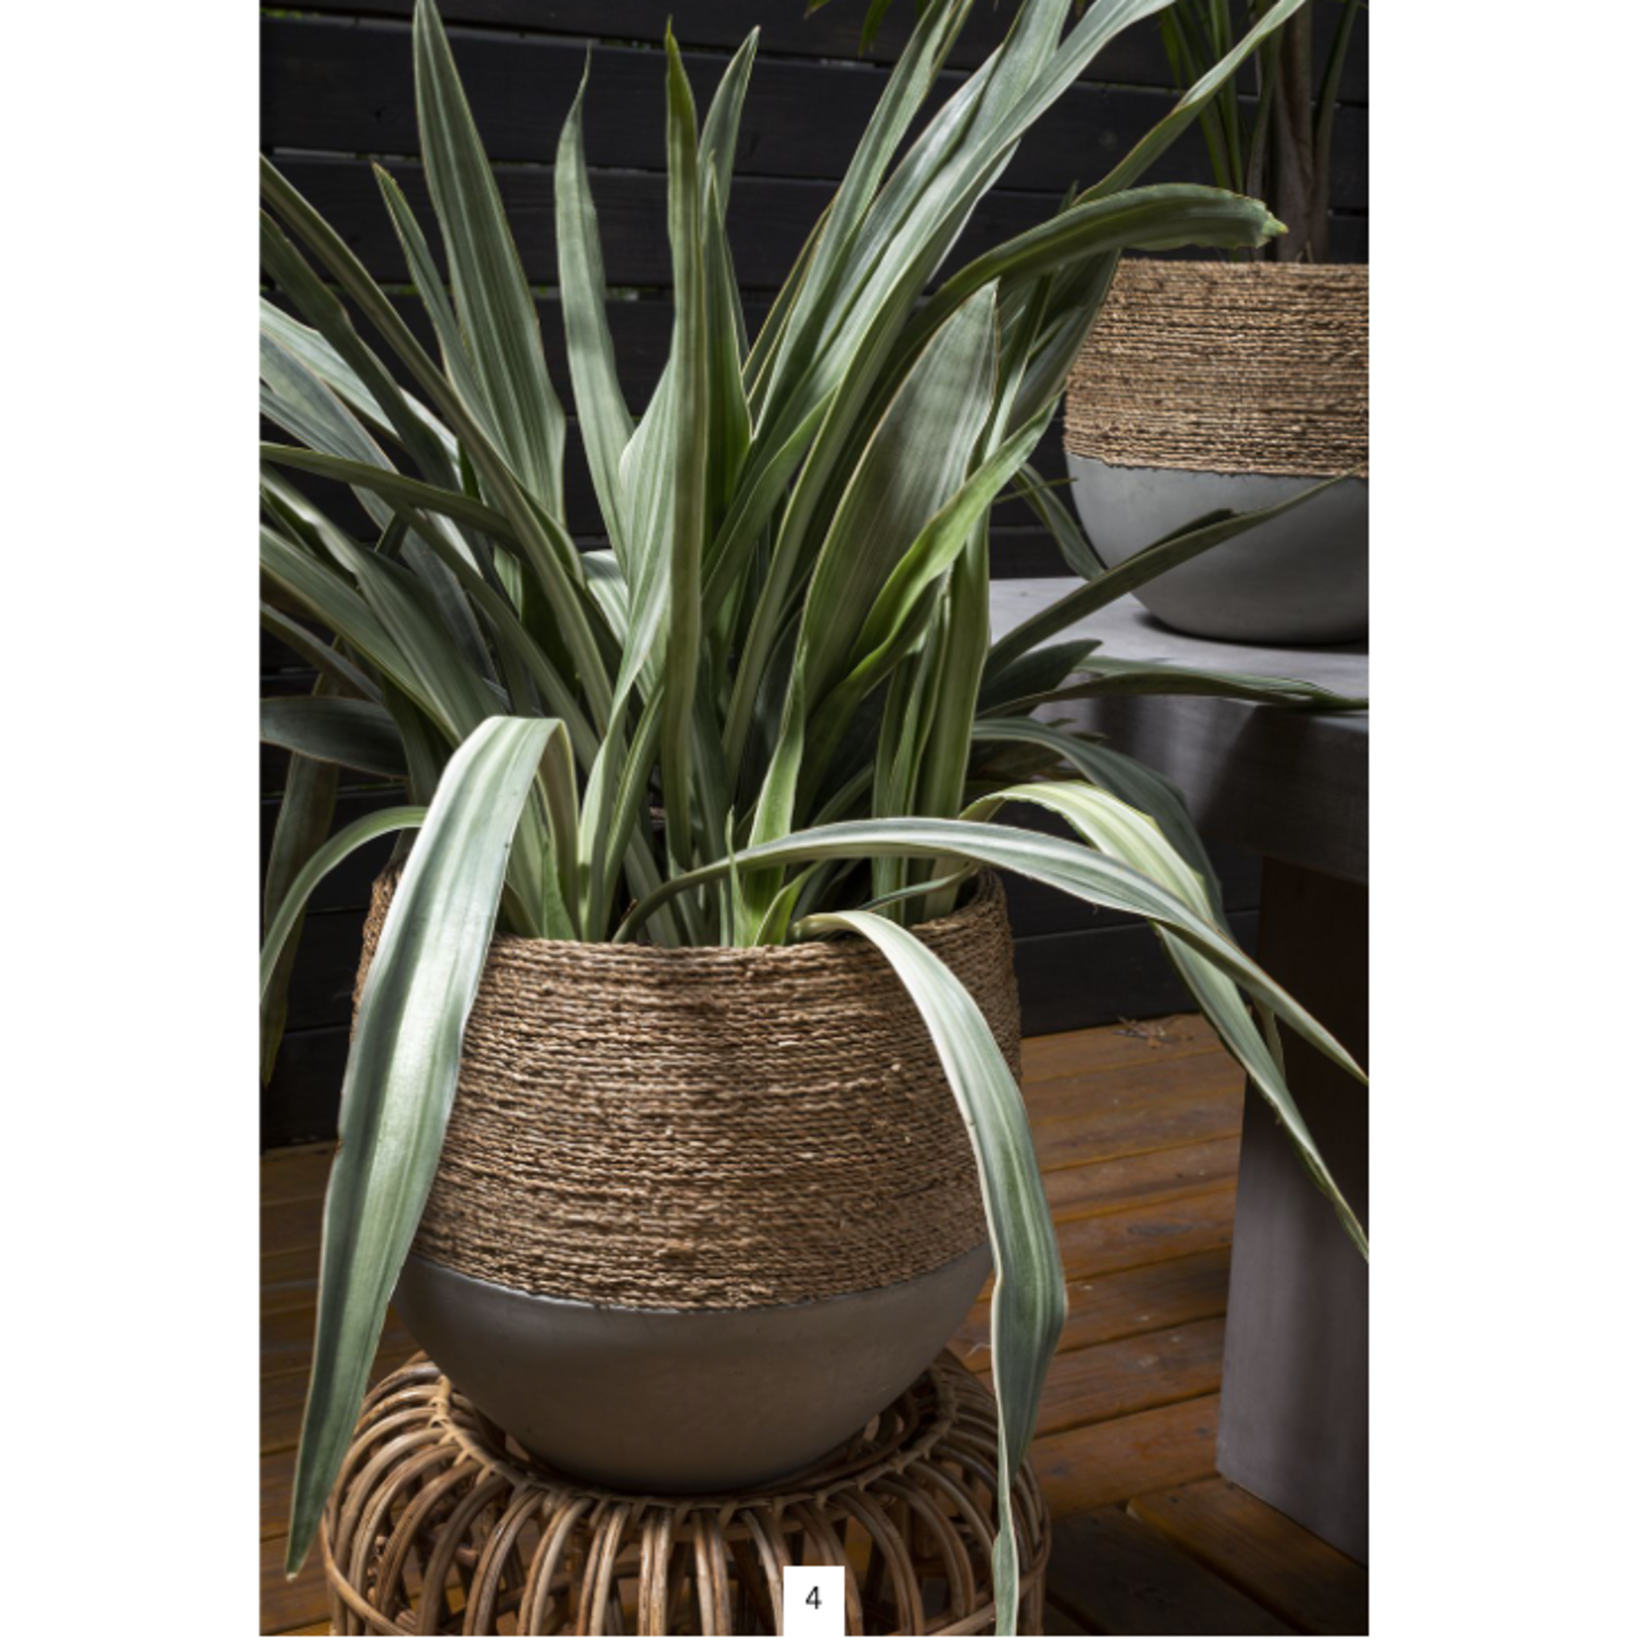 ACCENT DECOR 14.5”h x 15” CONCRETE REED POT WITH NATURAL ROPE